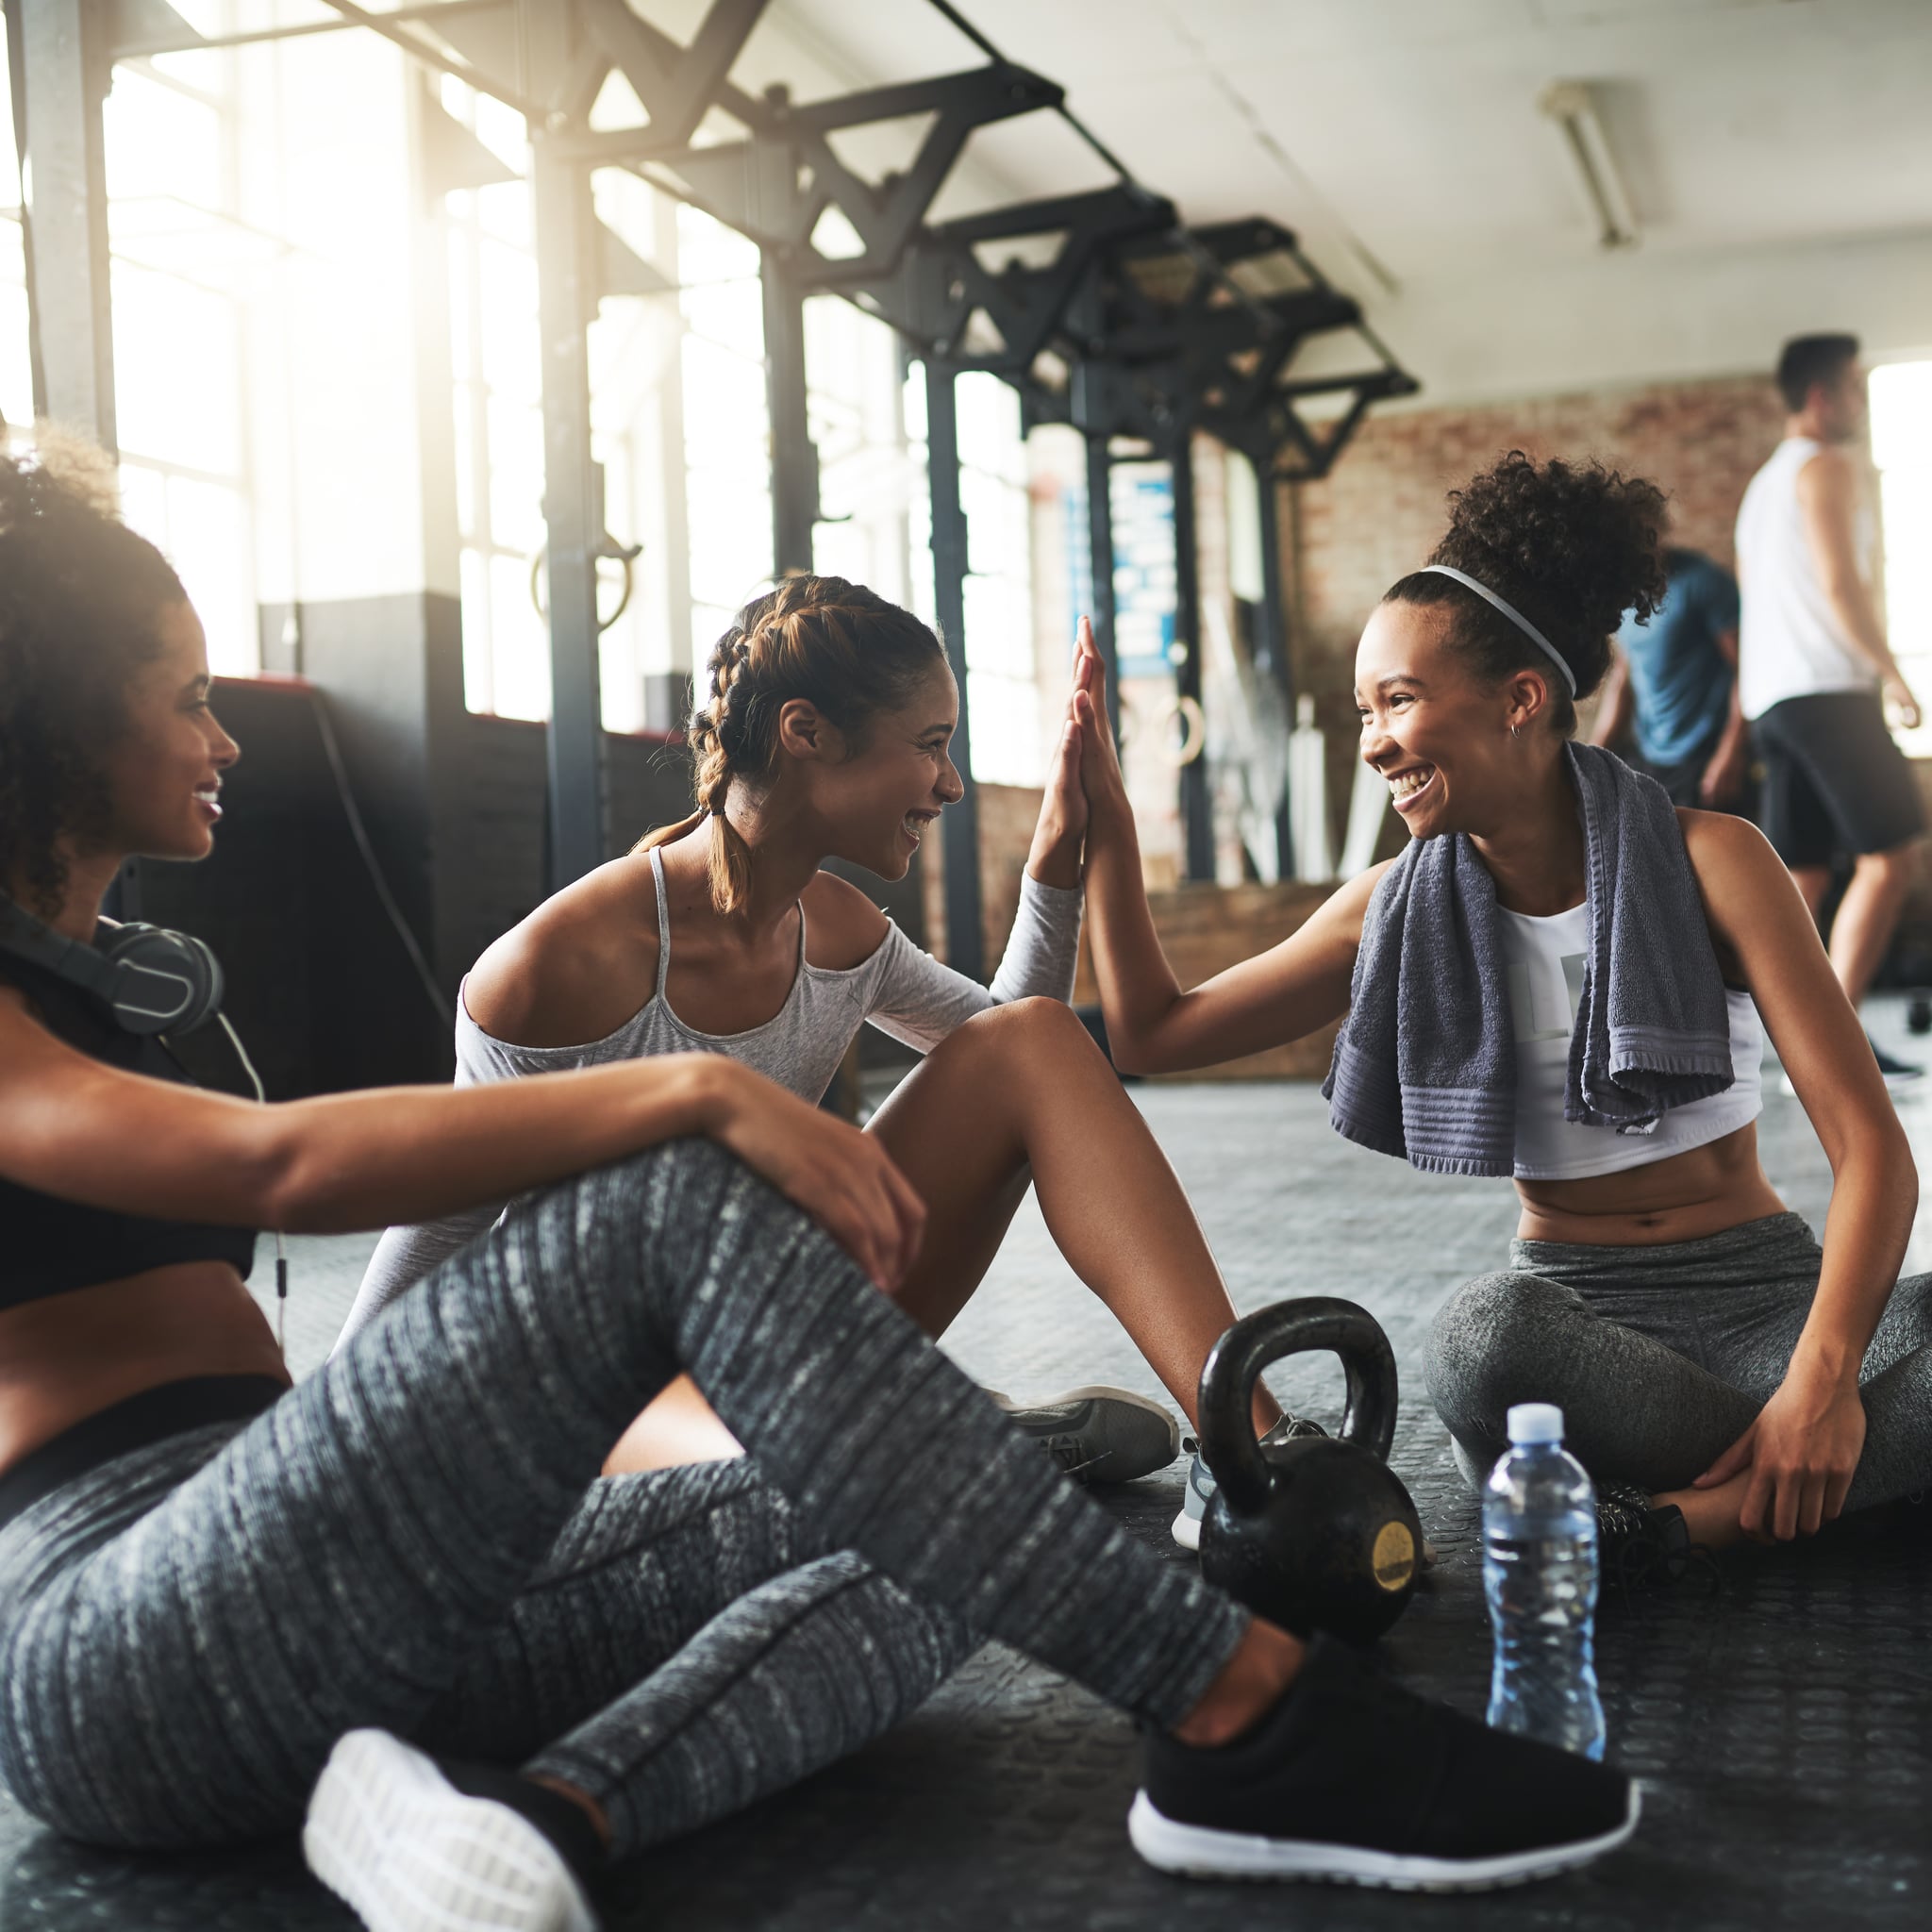 <p>Walking into the gym for the first time <a href="https://www.popsugar.com/fitness/what-is-gymtimidation-49052817" class="ga-track">can be intimidating</a>, not just because you want to fit in amongst a sea of regular gym goers. There may be machines you've never heard of that you want to try, and even <a href="https://www.popsugar.com/fitness/How-Choose-Right-Weight-45658061" class="ga-track">choosing the right free weights</a> can seem daunting if you've never lifted before. That's where this gym workout plan for beginners comes into play. Created with Holly Roser, an NASM-certified personal trainer and owner of <a href="https://www.hollyroser.com/" class="ga-track">Holly Roser Fitness</a> in San Matteo, CA, this gym plan for beginners provides a week's worth of newbie gym workouts to get you started, and you can build on this routine to keep challenging yourself and get stronger over time.</p> <p>This gym workout routine is not only great for people who are heading to the gym for the first time, but also for those who <a href="https://www.popsugar.com/fitness/How-Do-I-Start-Working-Out-Again-43896185" class="ga-track">haven't worked out in a while</a>. The gym workout plan contains two strength circuits, three days of cardio, and two days of <a href="https://www.popsugar.com/fitness/how-to-relieve-sore-muscles-49170135" class="ga-track">active recovery</a>. "For the first two weeks, your new program should have two strength training days that are three days apart, with cardio days in between," Roser tells POPSUGAR. As you build your endurance, move up to three cardio days and three strength training days. For the latter, you can use a mix of moves from the circuits in this plan, or check out other strength training workouts such as this <a href="https://www.popsugar.com/fitness/Basic-Dumbbell-Workout-45639736" class="ga-track">basic dumbbell workout</a> or this <a href="https://www.popsugar.com/fitness/Circuit-Workout-Weights-36282918" class="ga-track">full-body circuit workout</a>. (You can probably take that step about three weeks after getting comfortable with this routine, Holly says.) Make sure to switch up your forms of cardio, rotating between exercises like running, swimming, dance cardio, and indoor cycling to hit different muscle groups and keep from getting bored. </p> <p>Ready to move? Follow this gym workout plan for beginners, and you're sure to feel like a pro in no time. </p> <p align="right"><em>- Additional reporting by Lauren Mazzo and Alexis Jones</em></p>